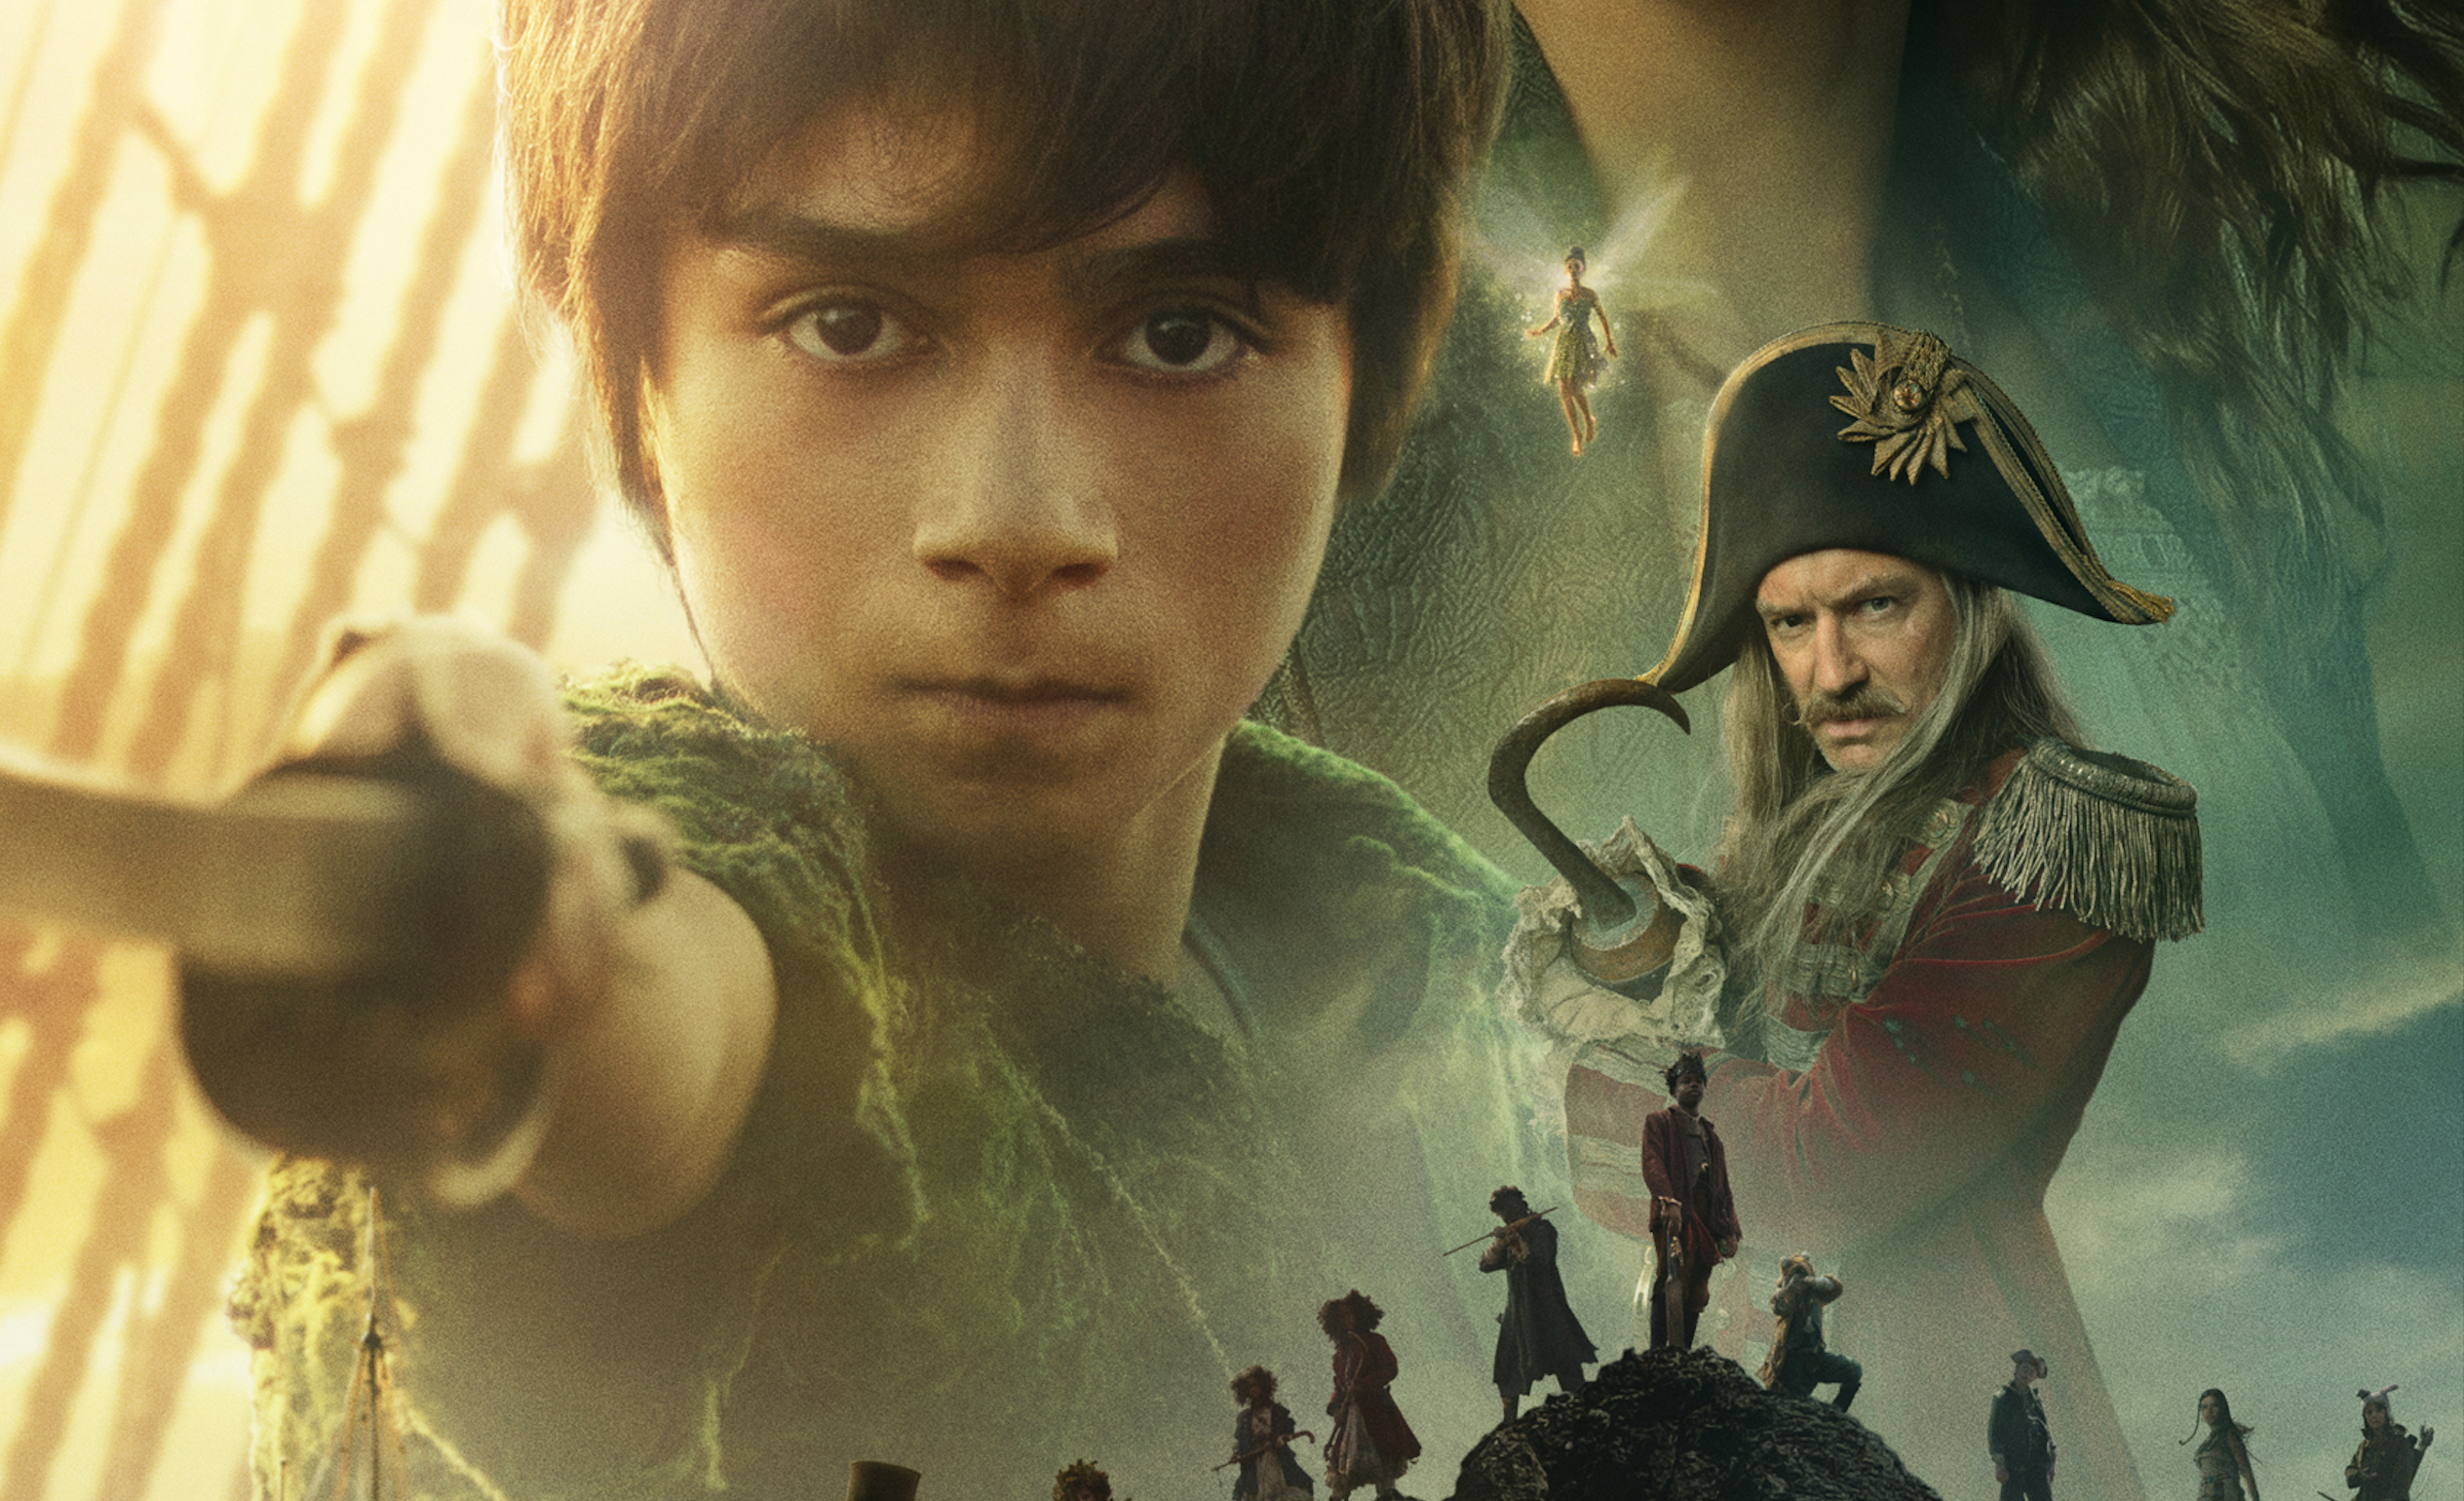 A close up of the poster to Peter Pan &amp; Wendy, with a large image of Peter Pan with a sword pointed towards the camera superimposed over Captain Hook scowling.